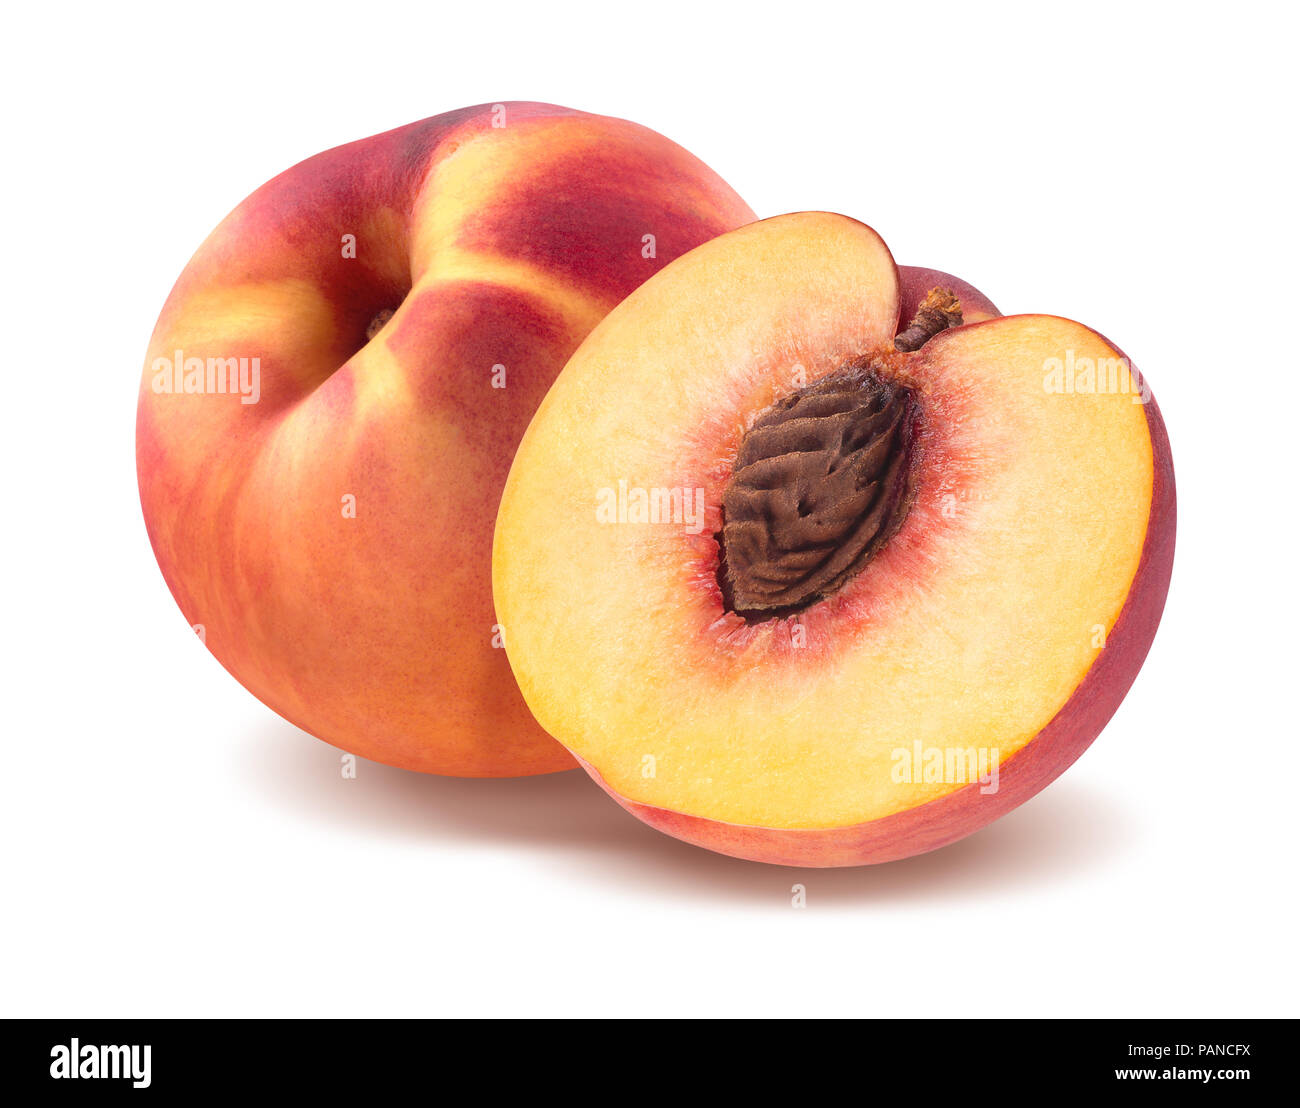 Fresh peach and half isolated on white background as package design element Stock Photo